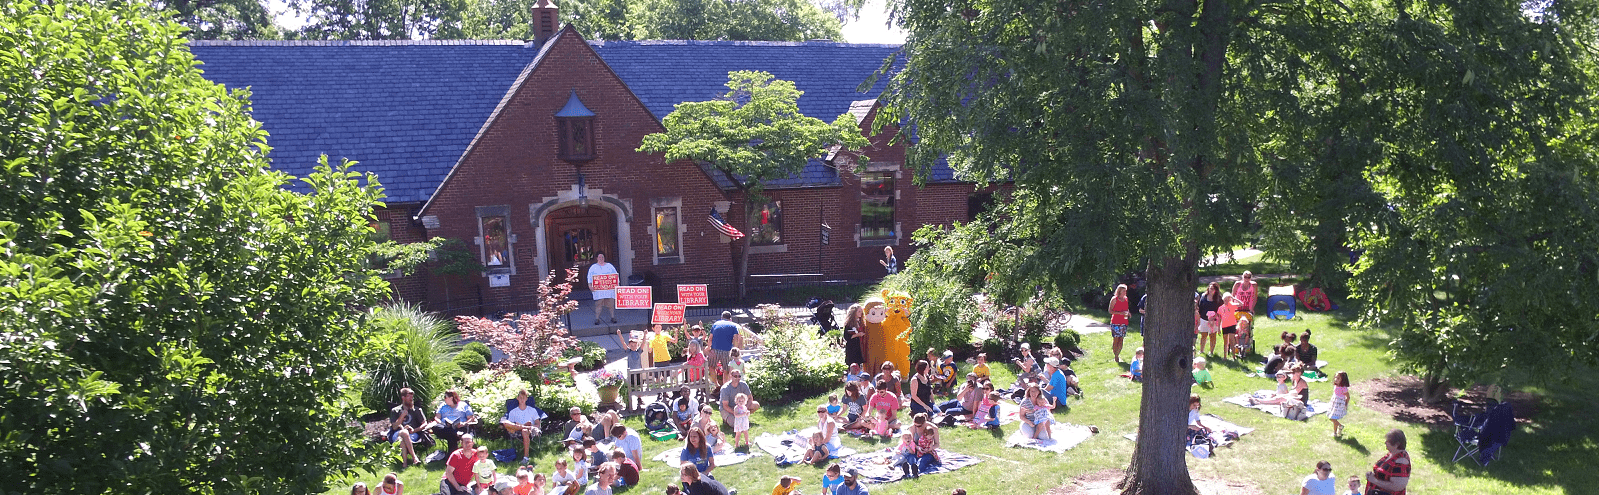 Event on the library lawn